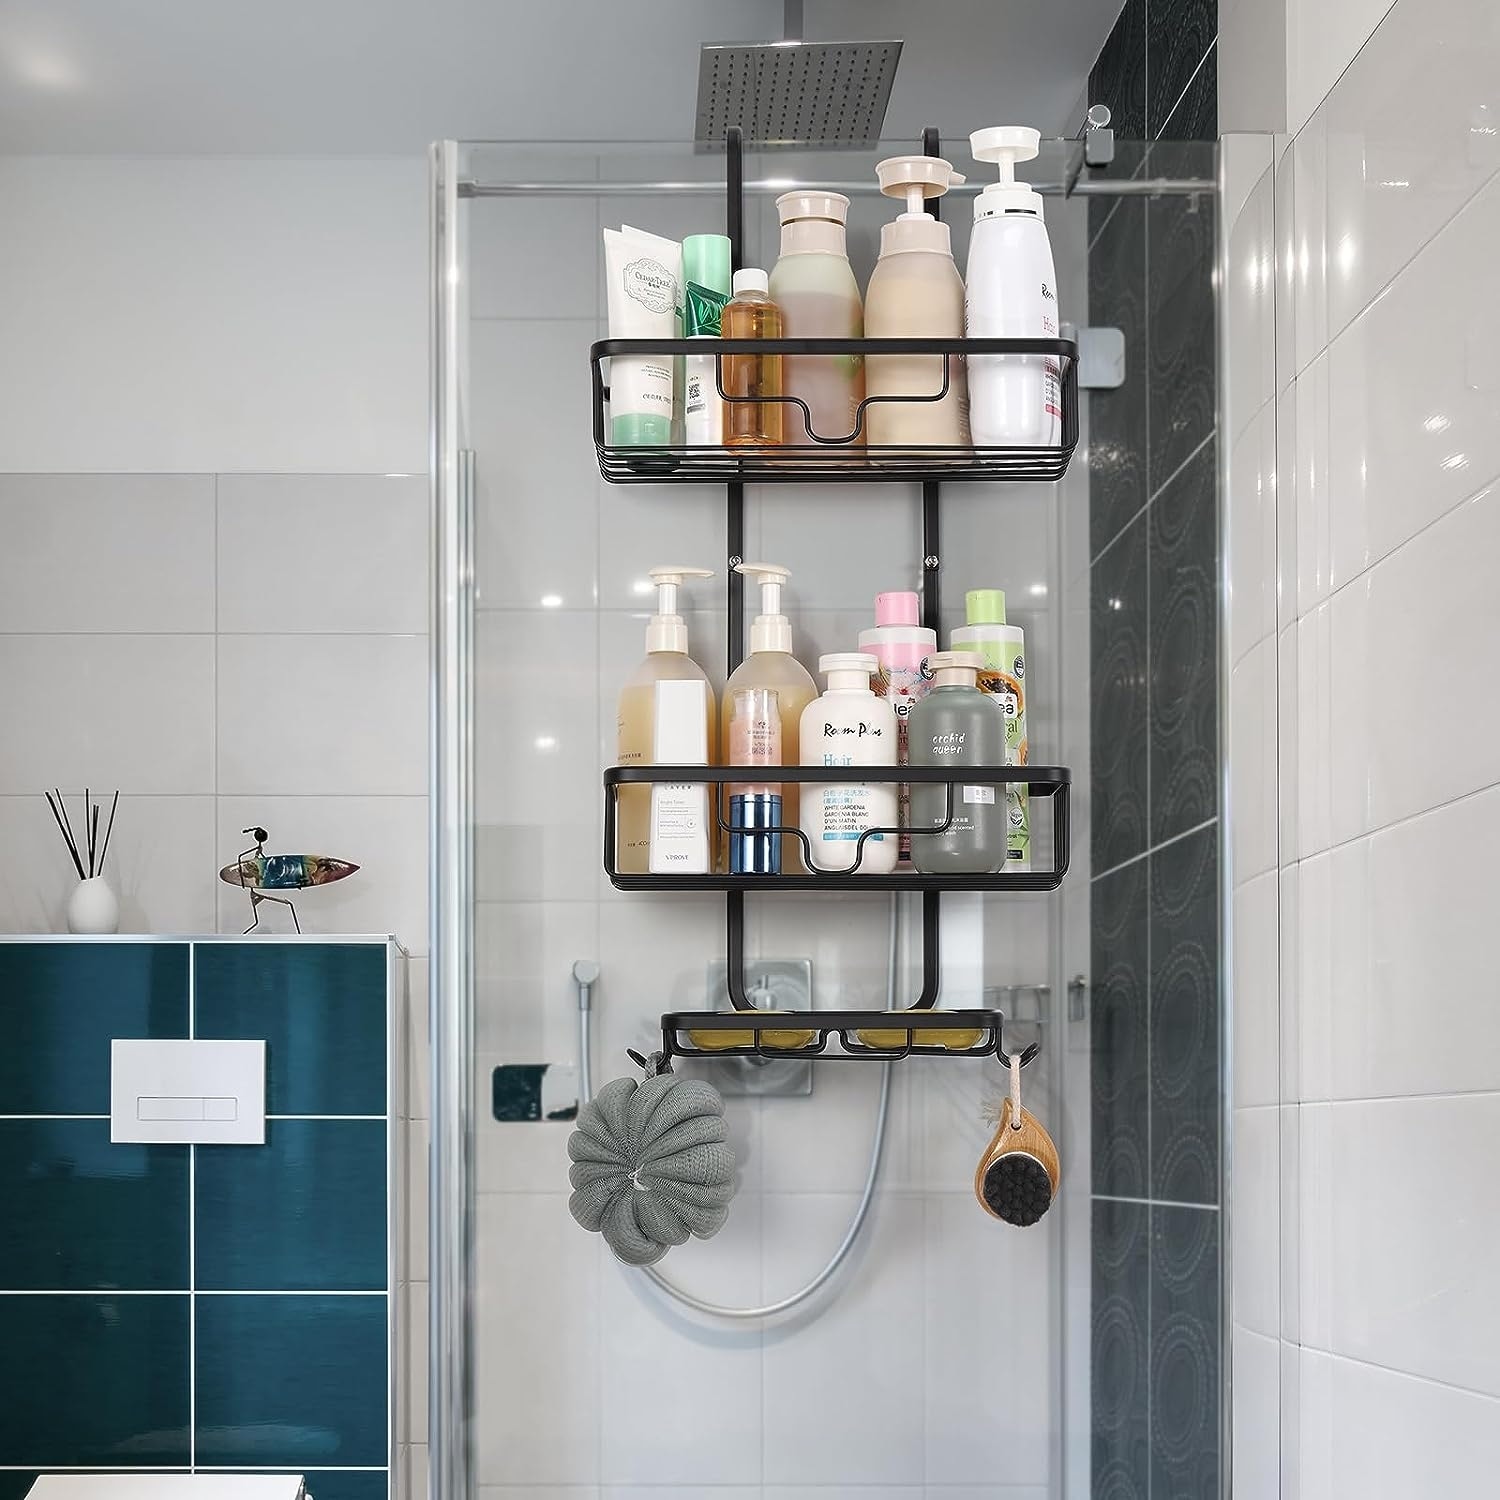 https://ak1.ostkcdn.com/images/products/is/images/direct/6fb9f0386cccfbcbbf2eee7cf4aa1f5b48bb3730/3-Tier-Shower-Racks-with-Hooks-and-Shampoo-Soap-Razor-Holder.jpg